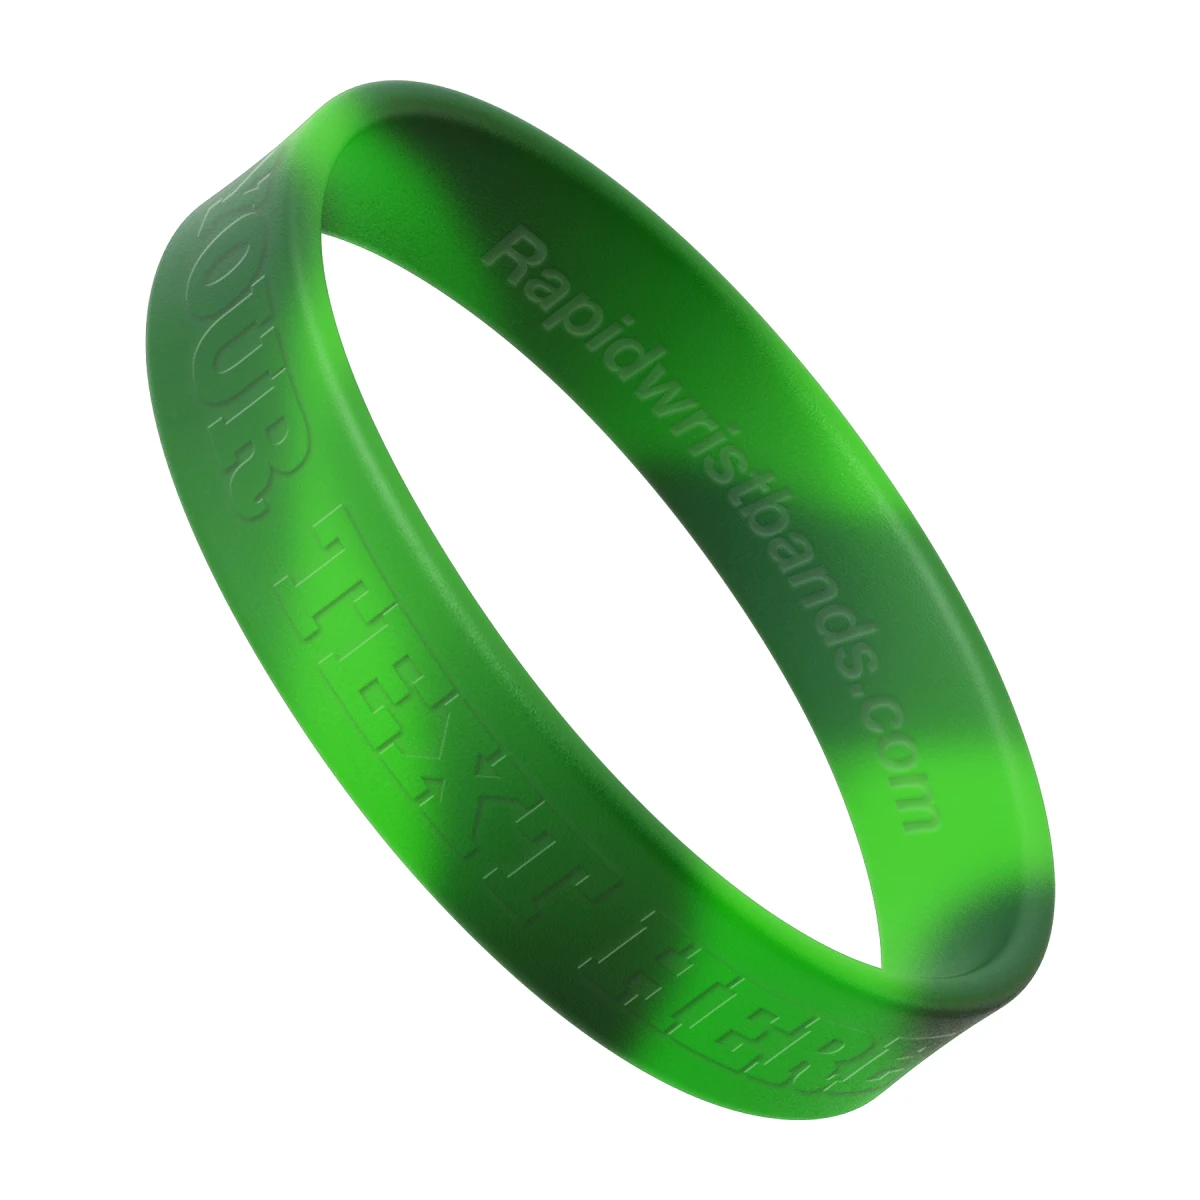 Swirl Green Camo Wristband With Your Text Here Embossed